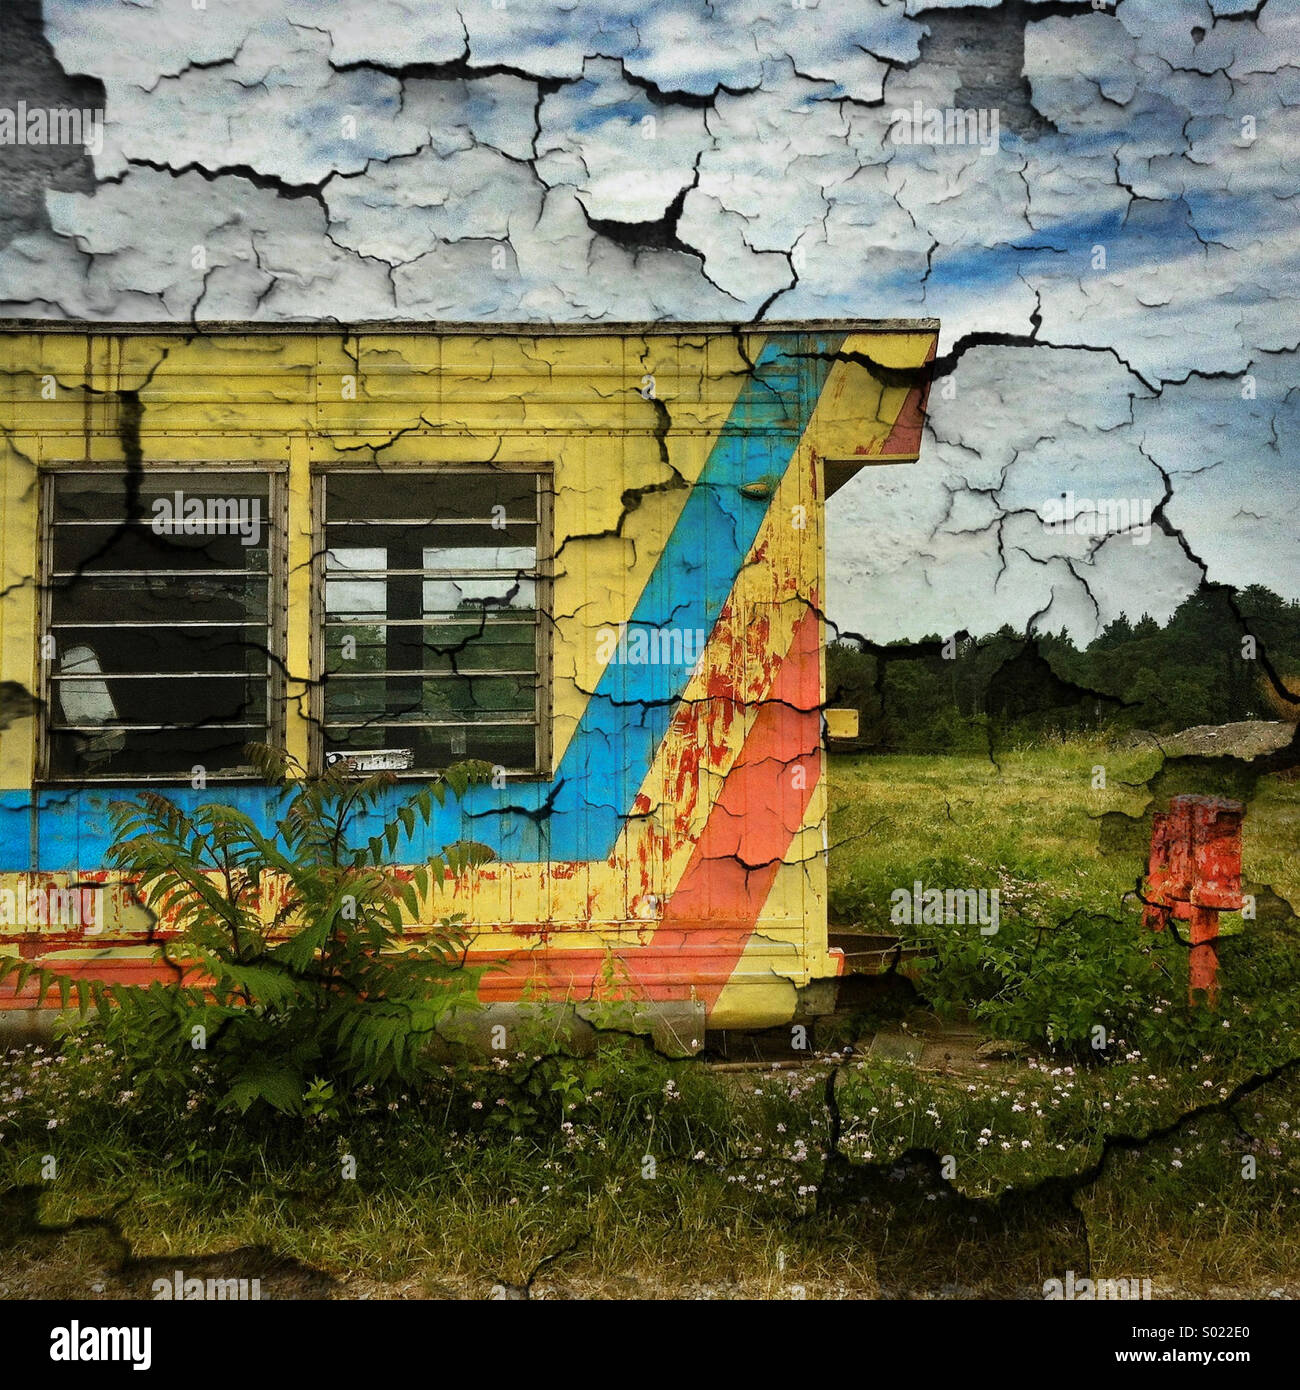 An image of a colorful abandoned trailer is enhanced with a peeling paint effect Stock Photo